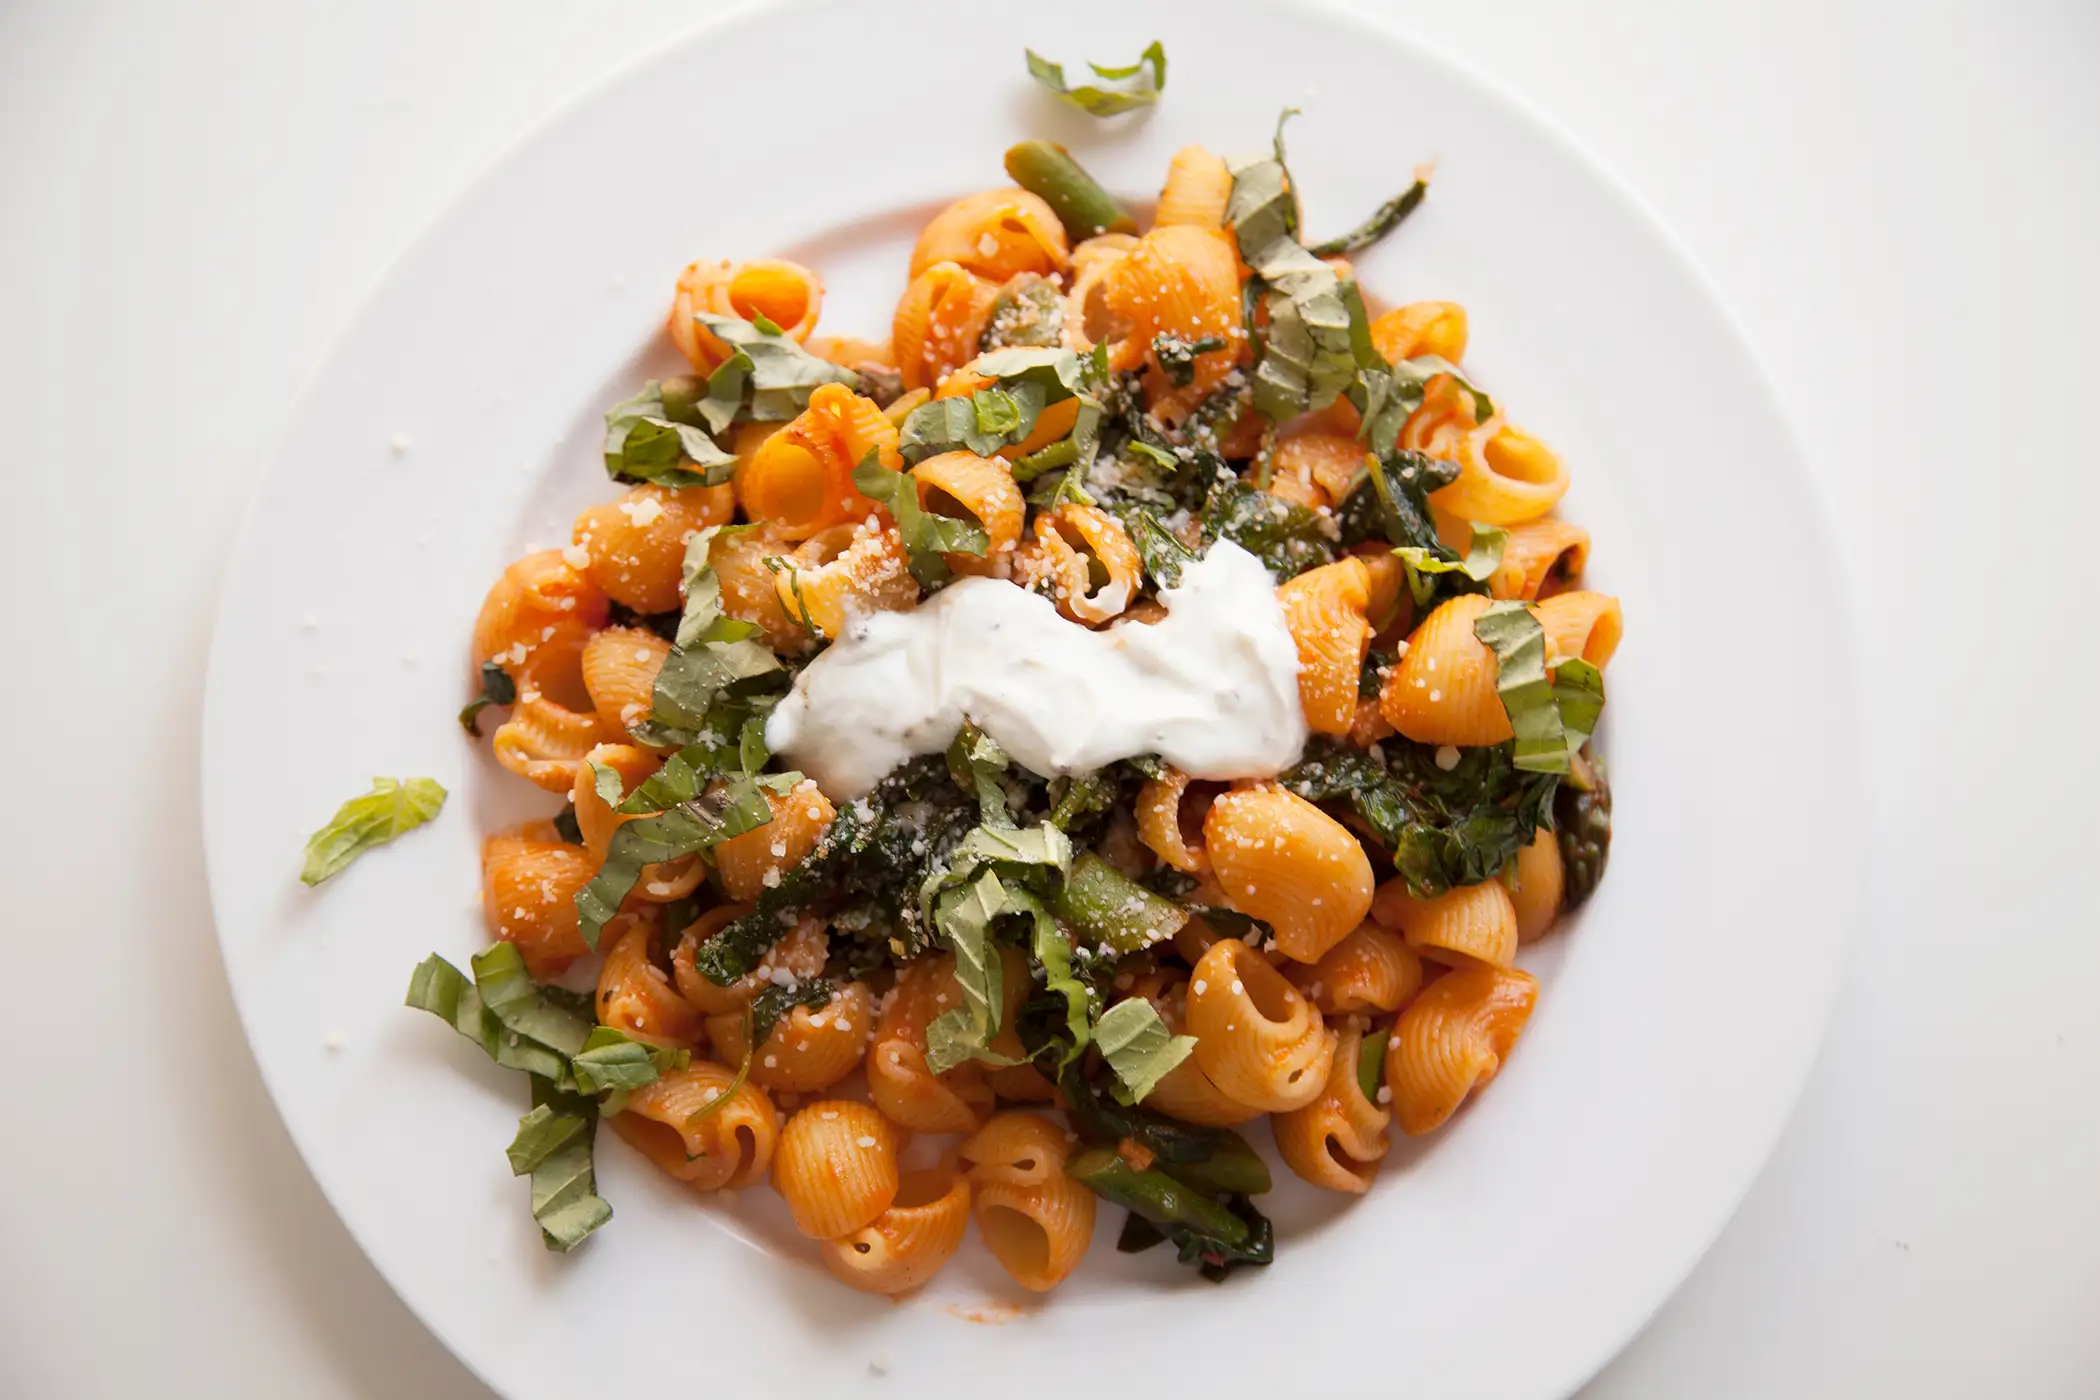 Blue Apron's Creamy Lumaca Rigata Pasta with asparagus and goat cheese.